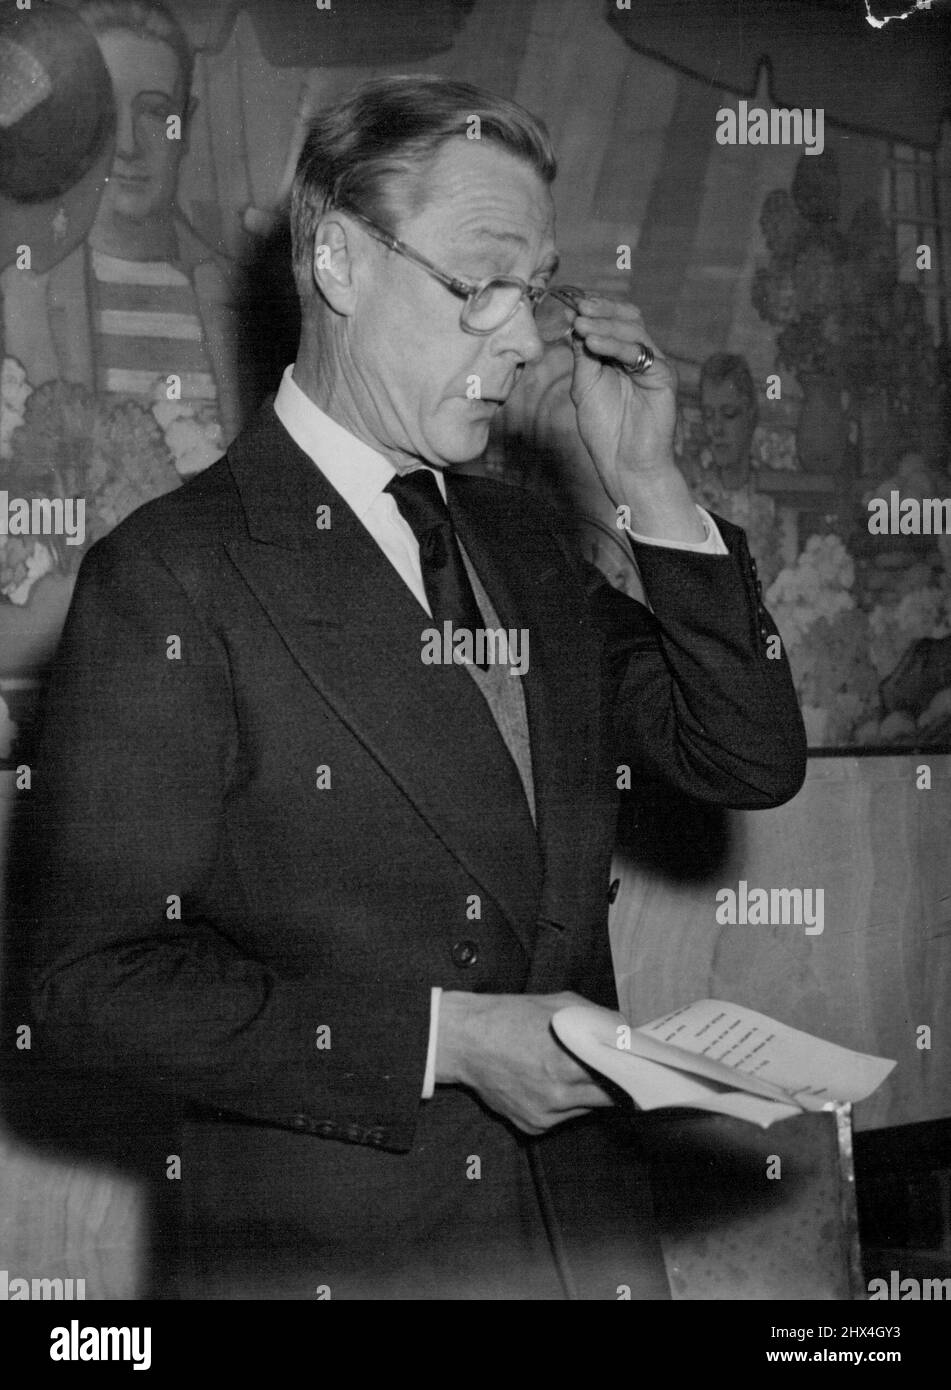 The Duke of Windsor at Southampton The Duke of Windsor adjusts his spectacles during the press conference he gave aboard the liner Queen Mary on his arrival at Southampton today February 13. He will be one of four Duke in the Funeral procession on Friday. In London, The Duke drove straight to Marlborough house to offer his sympathy to his mother, Queen Mary. March 02, 1953. (Photo by Associated Press Photo). Stock Photo